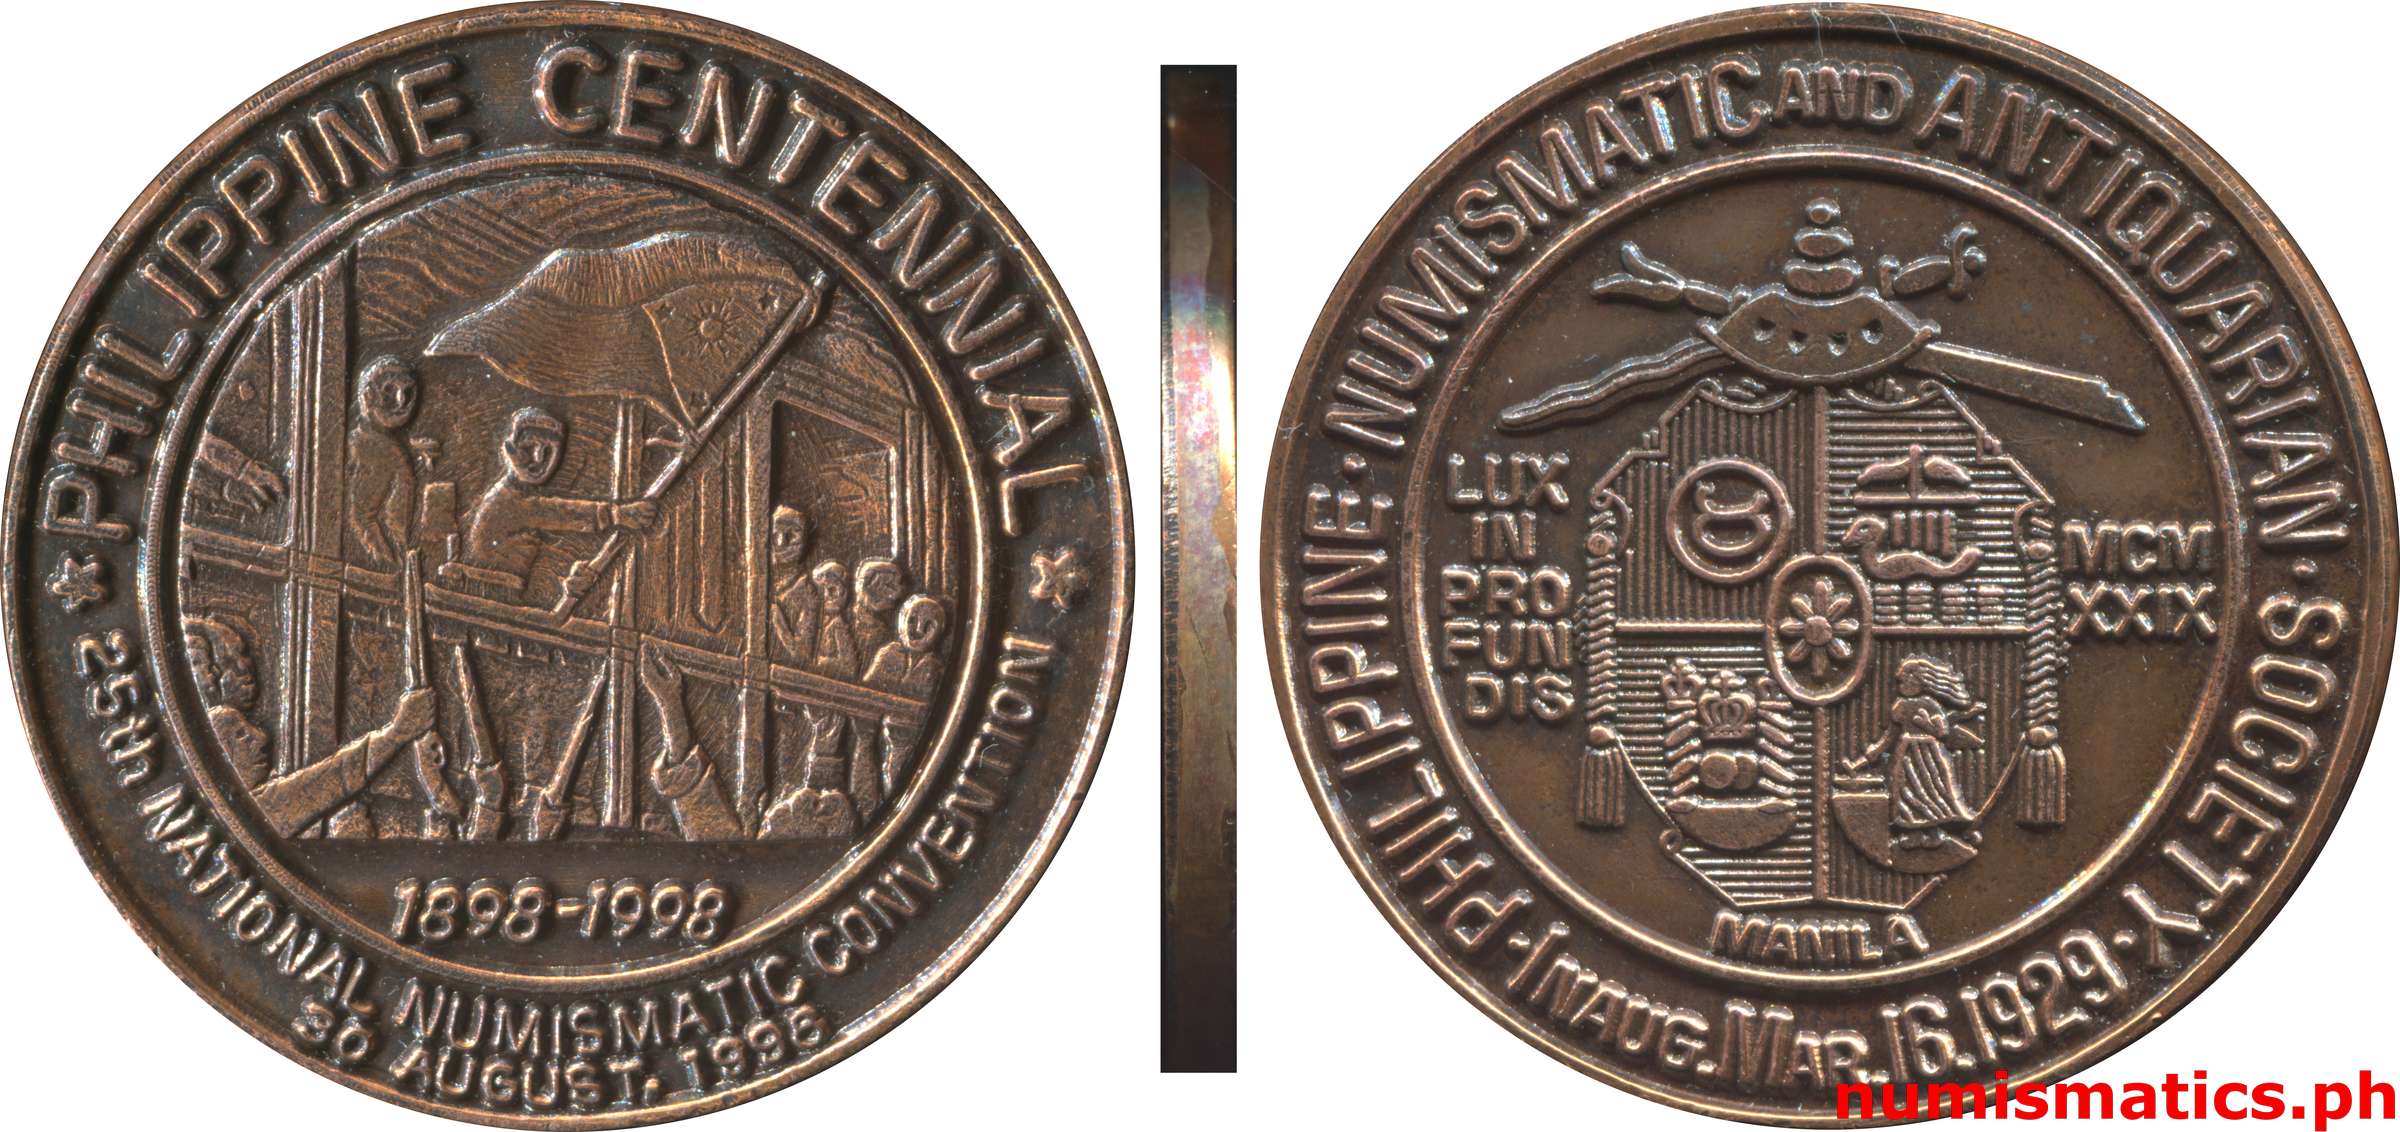 1998 25th National Numismatic Convention PNAS Medal